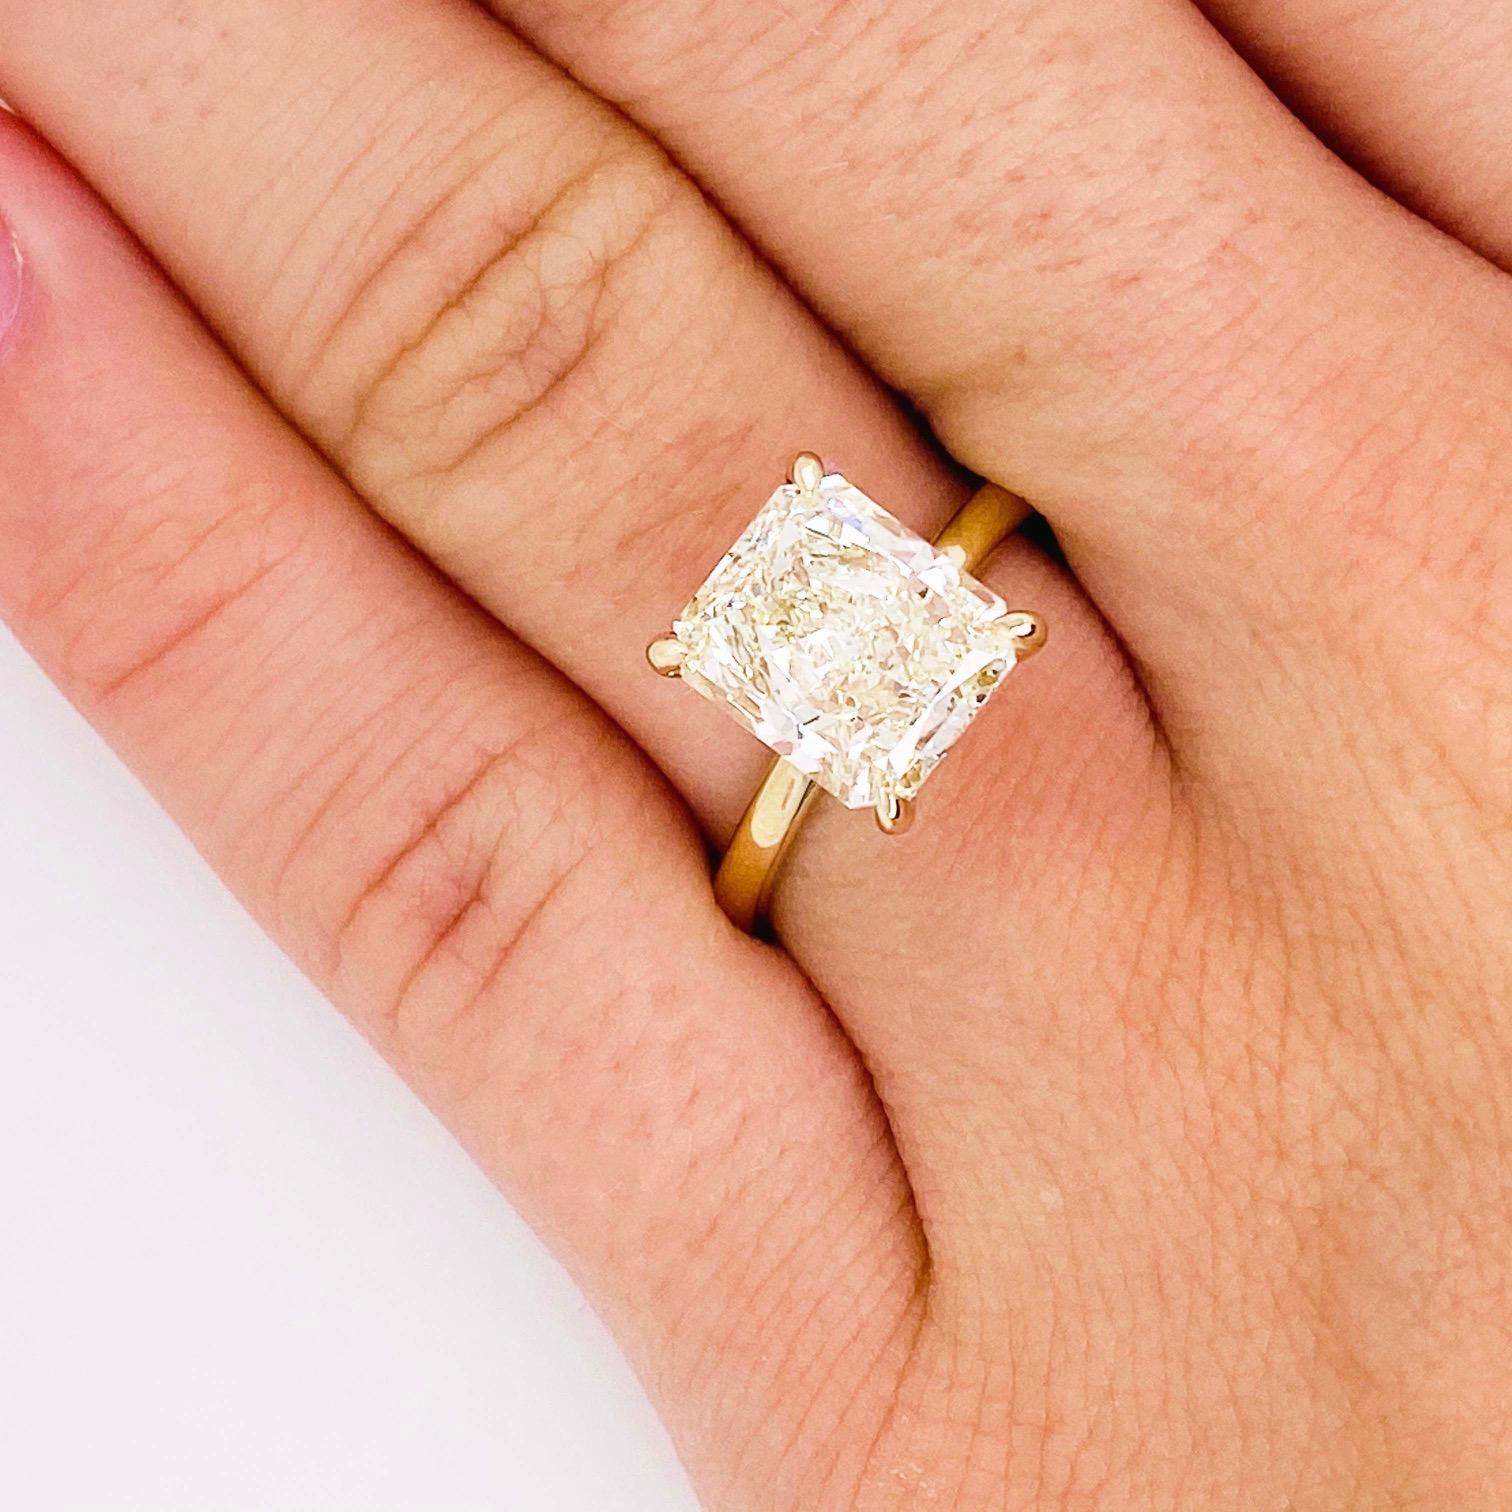 Gorgeous diamond solitaire engagement ring! With a GIA certified 3.00 carat, radiant cut diamond set in 4 elegant pointed prongs (or claw prongs)! The 14k yellow gold engagement ring is the perfect compliment to this stunning radiant diamond.